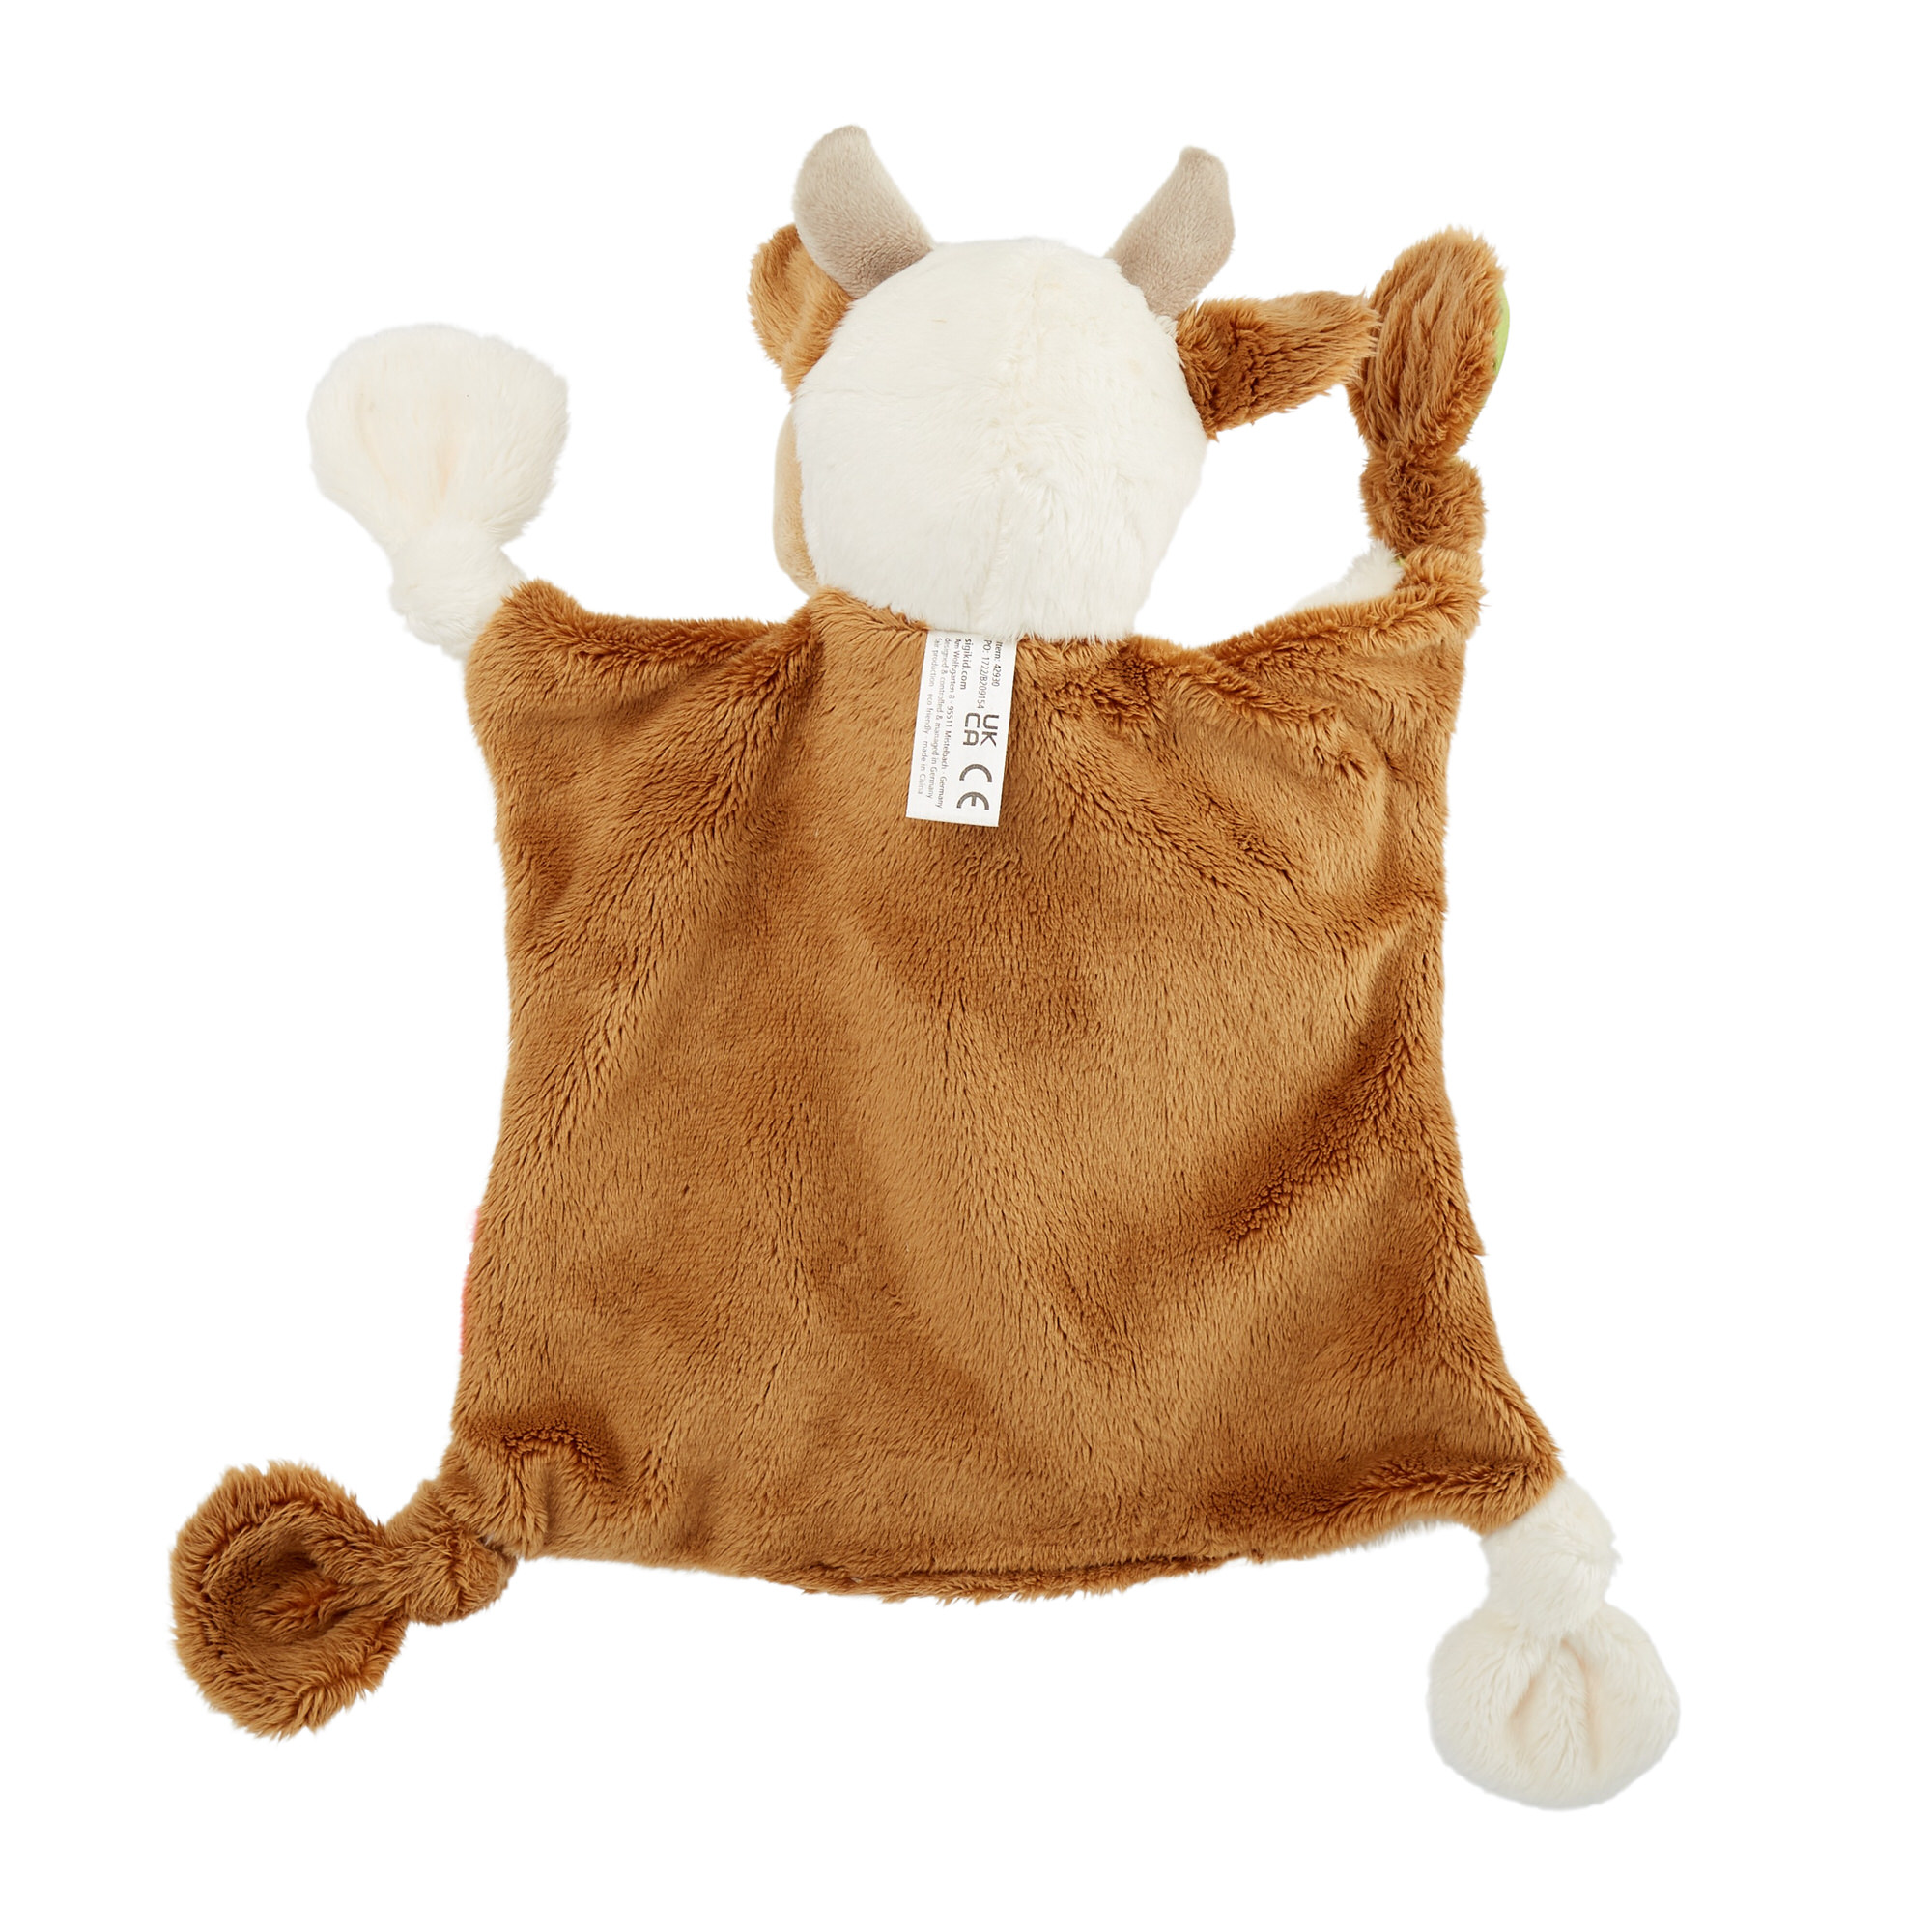 Plush comforter cow, Characters